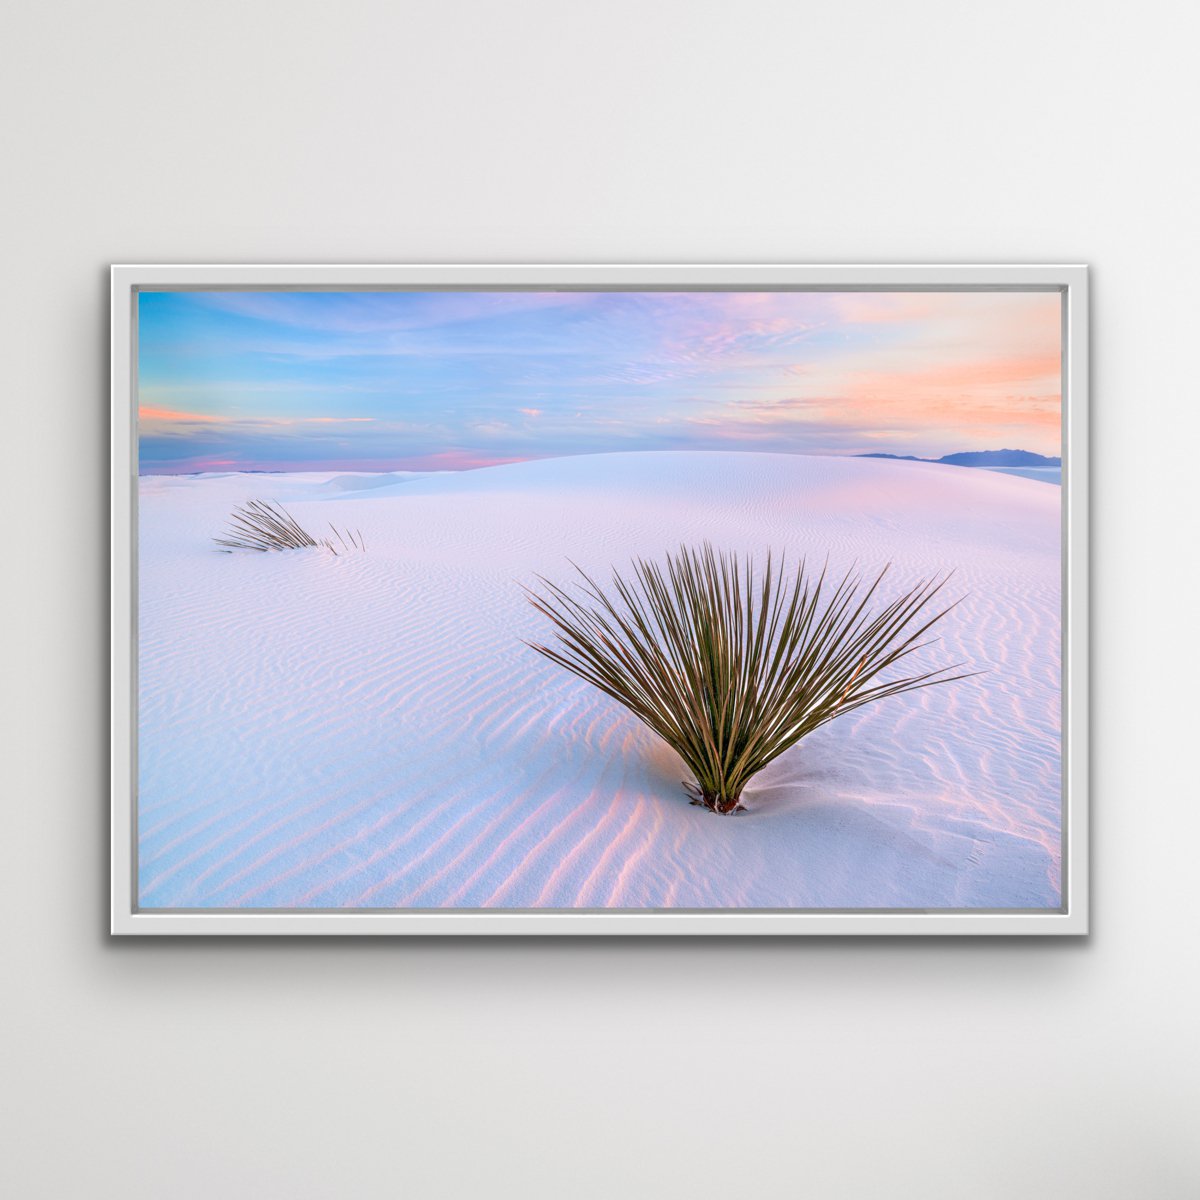 White Dunes, New Mexico - FRAMED - Limited Edition by Francesco Carucci